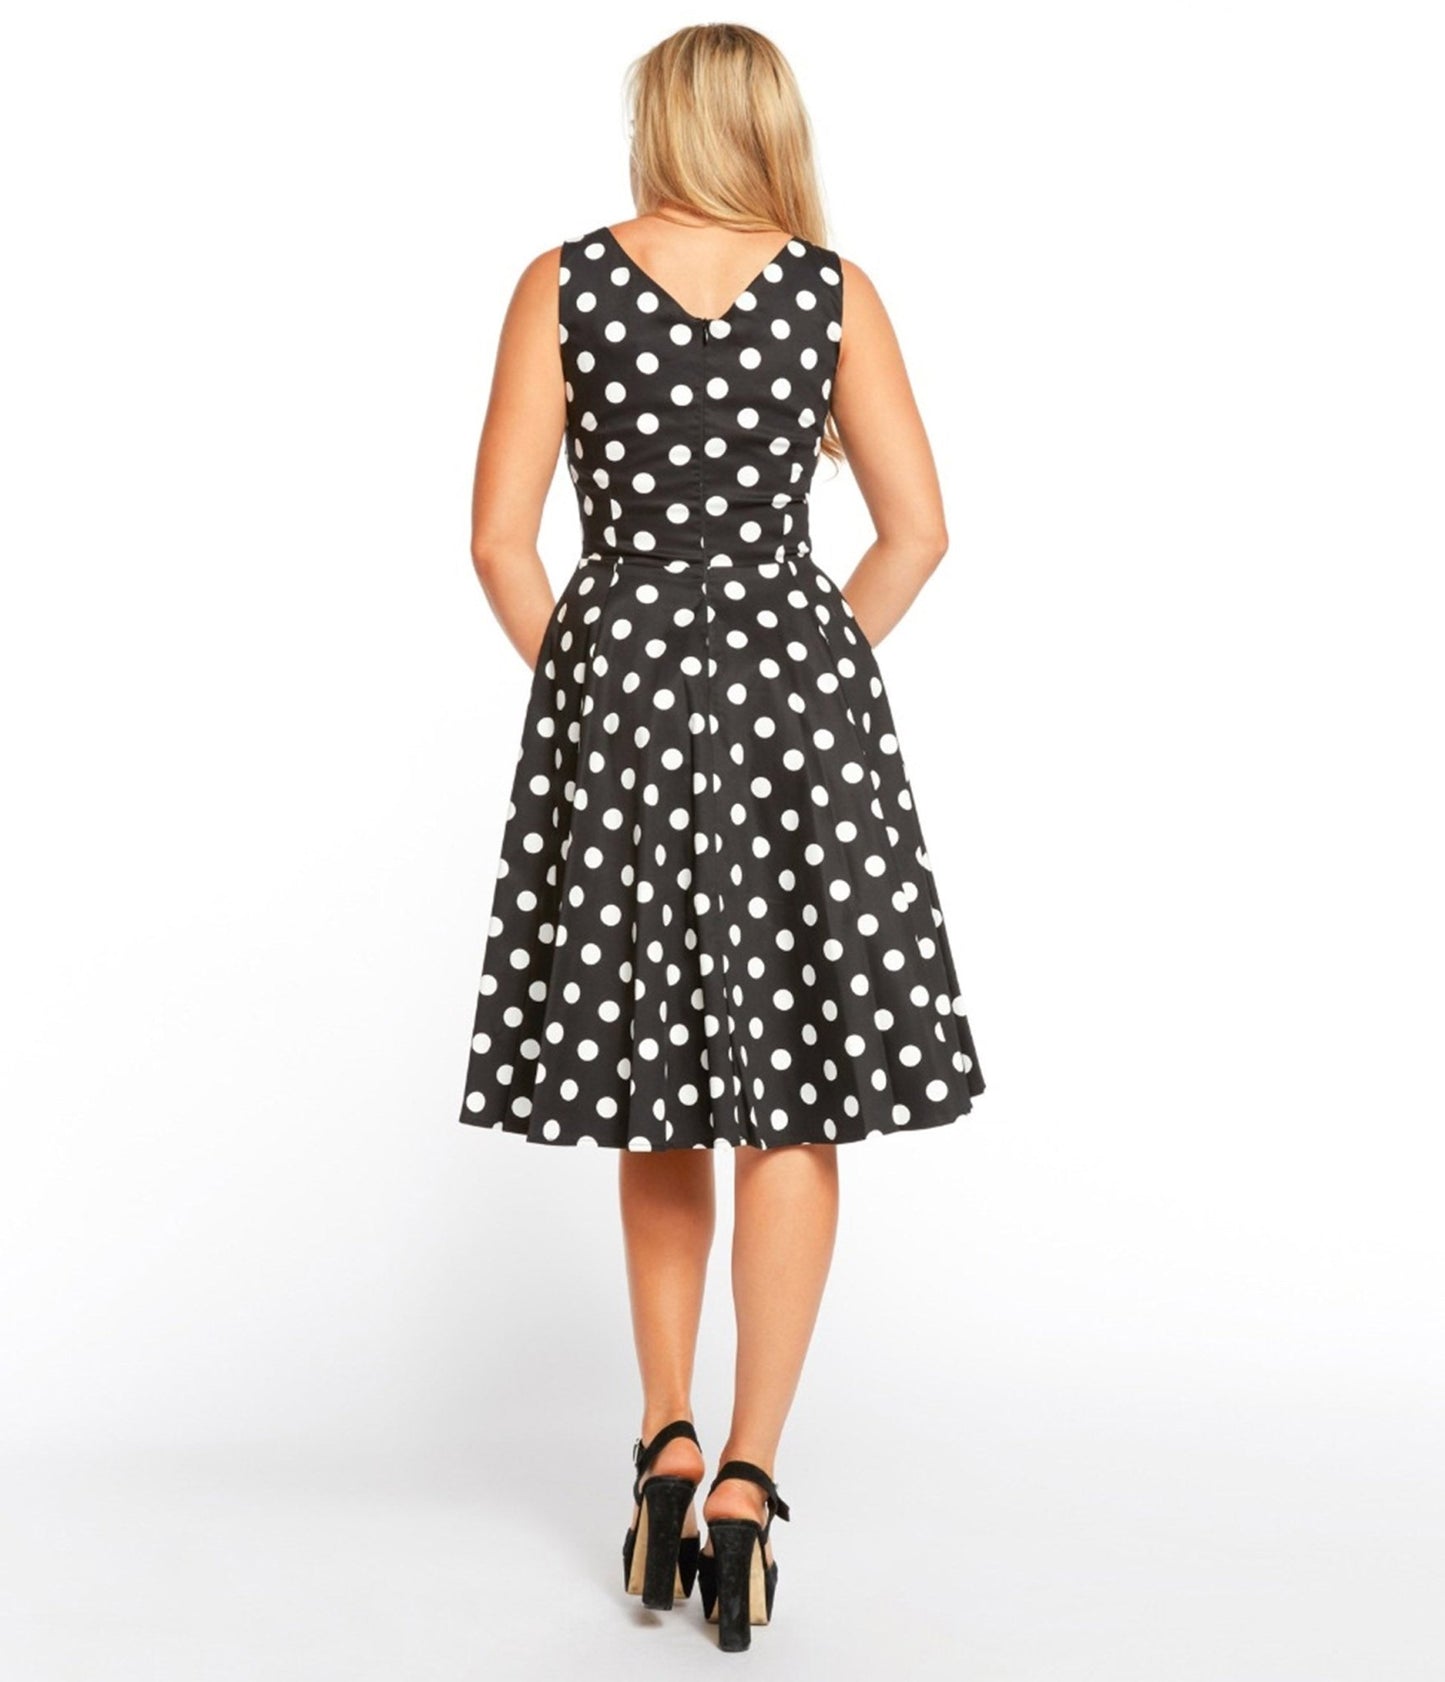 Black & White Polka Dot Sleeveless Swing Dress - Unique Vintage - Womens, DRESSES, FIT AND FLARE